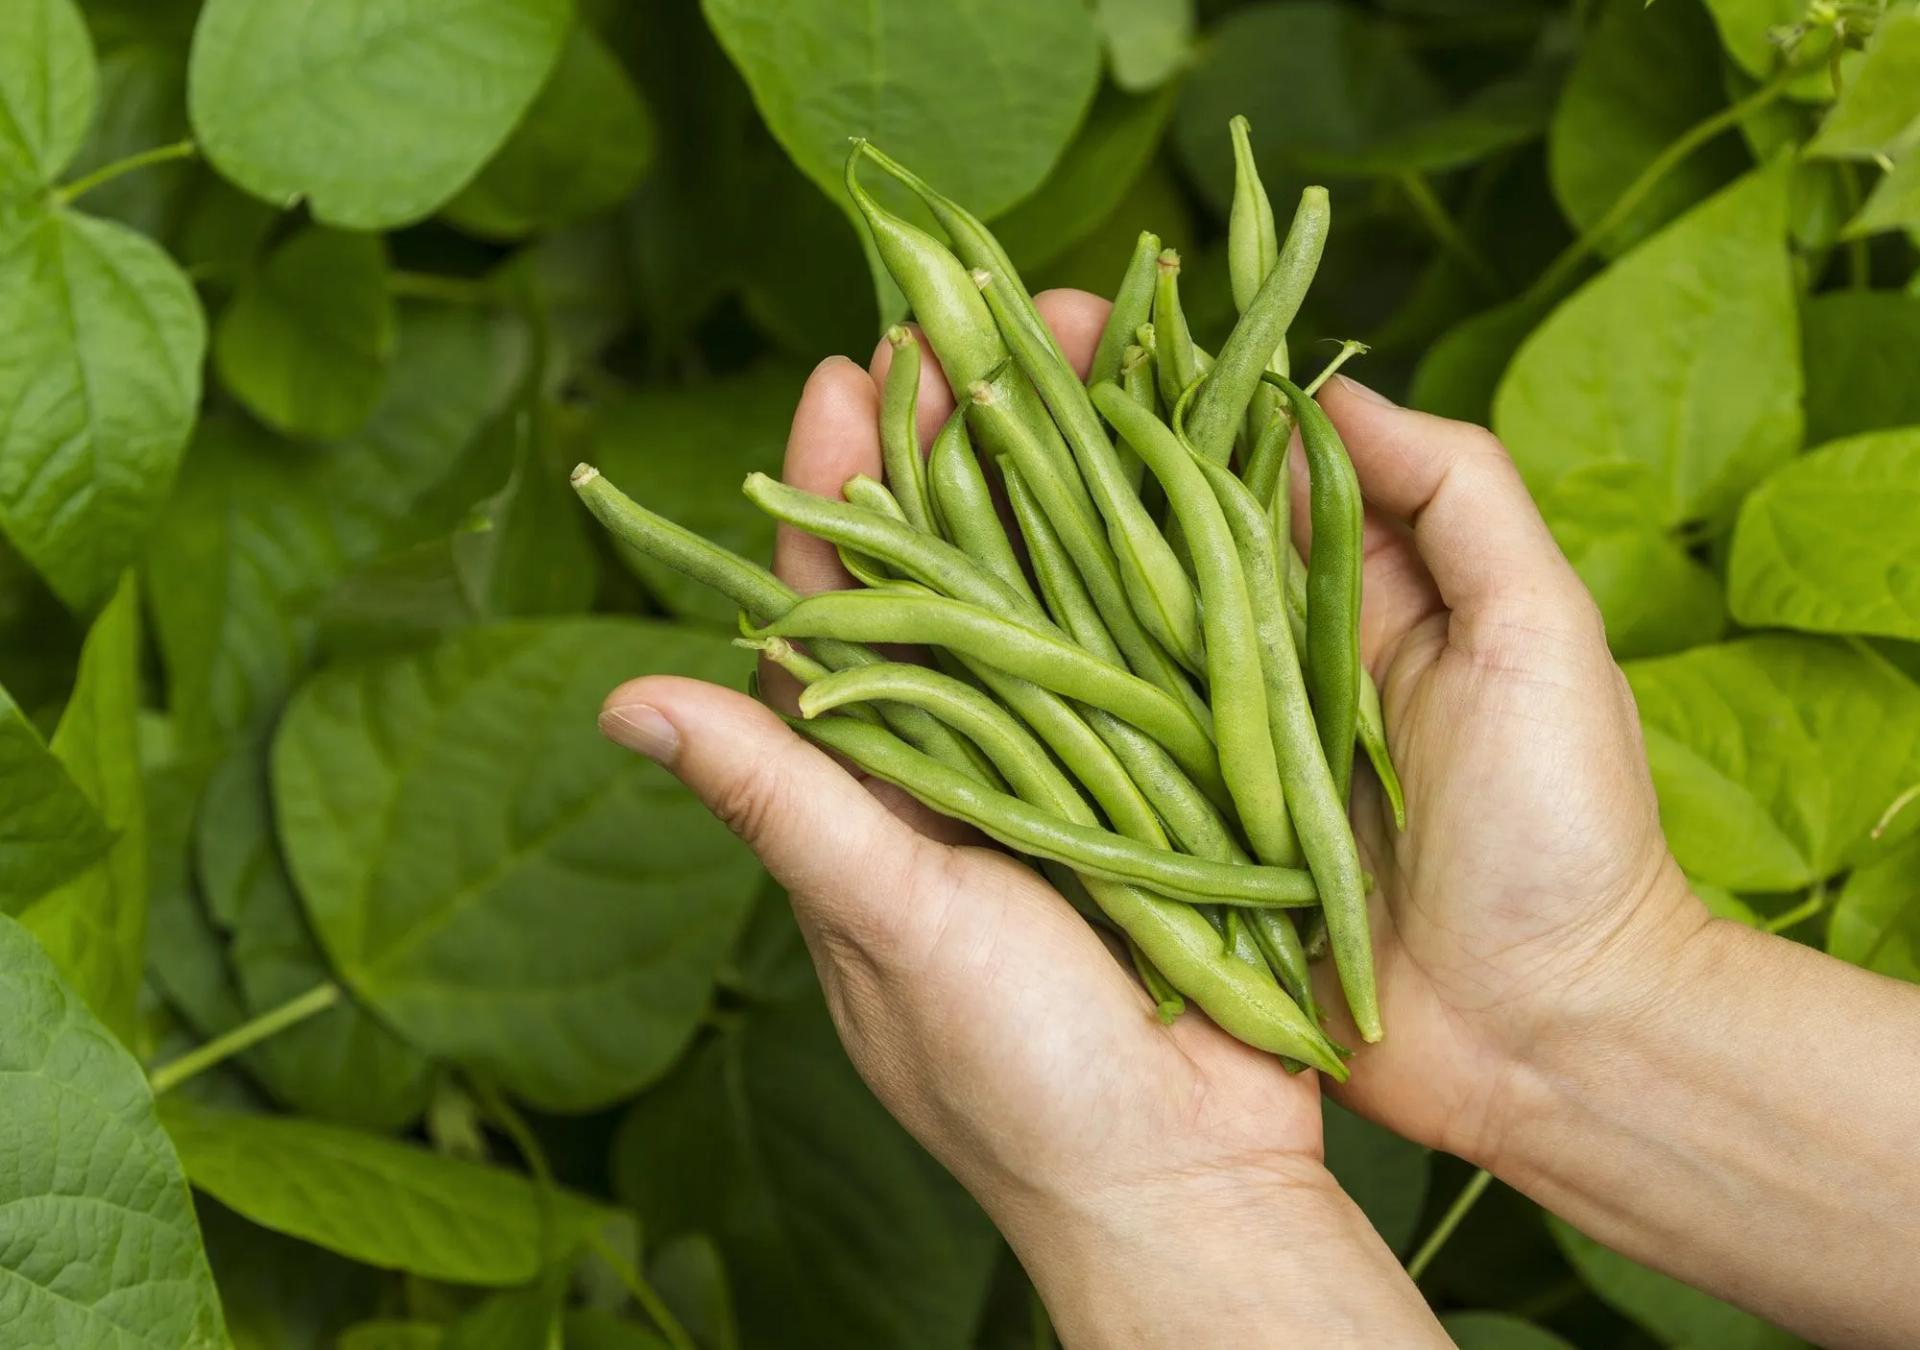 Green Beans in a Hand